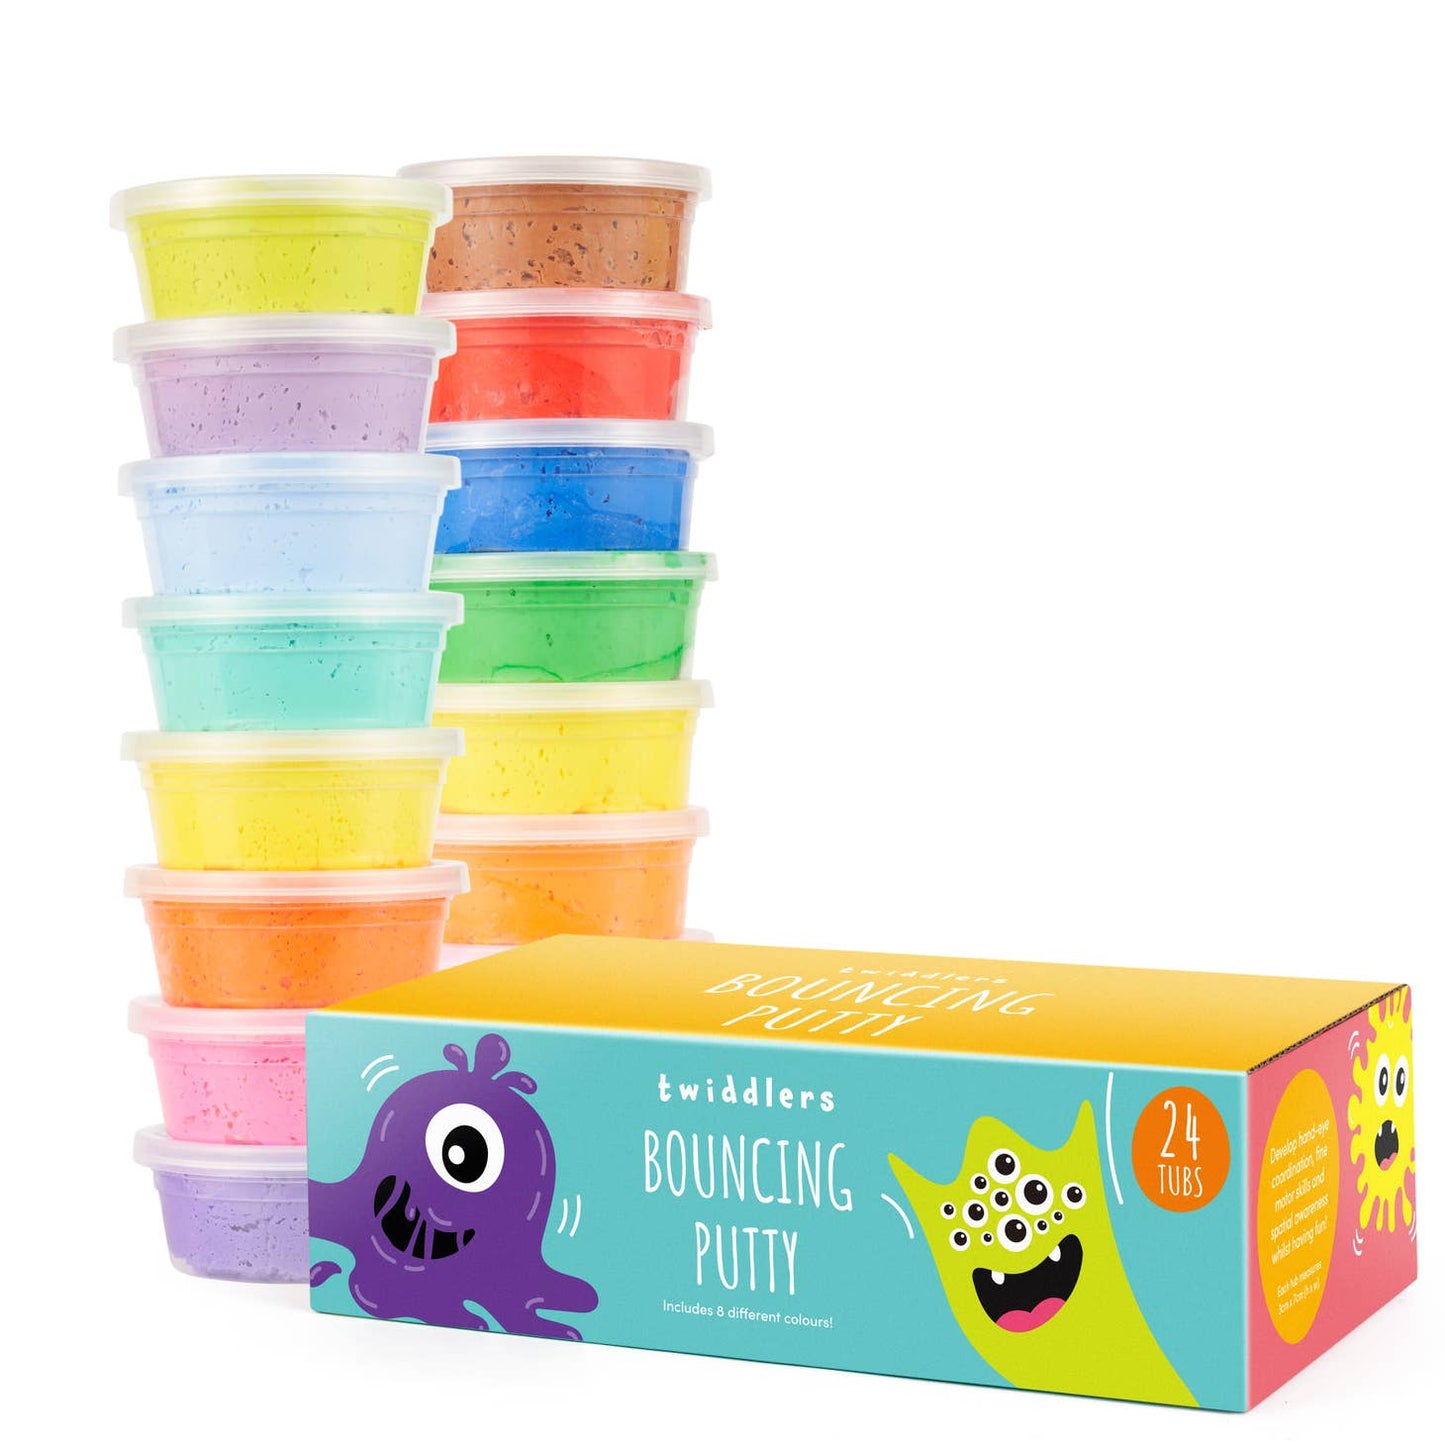 24 Bouncing Putty Pots